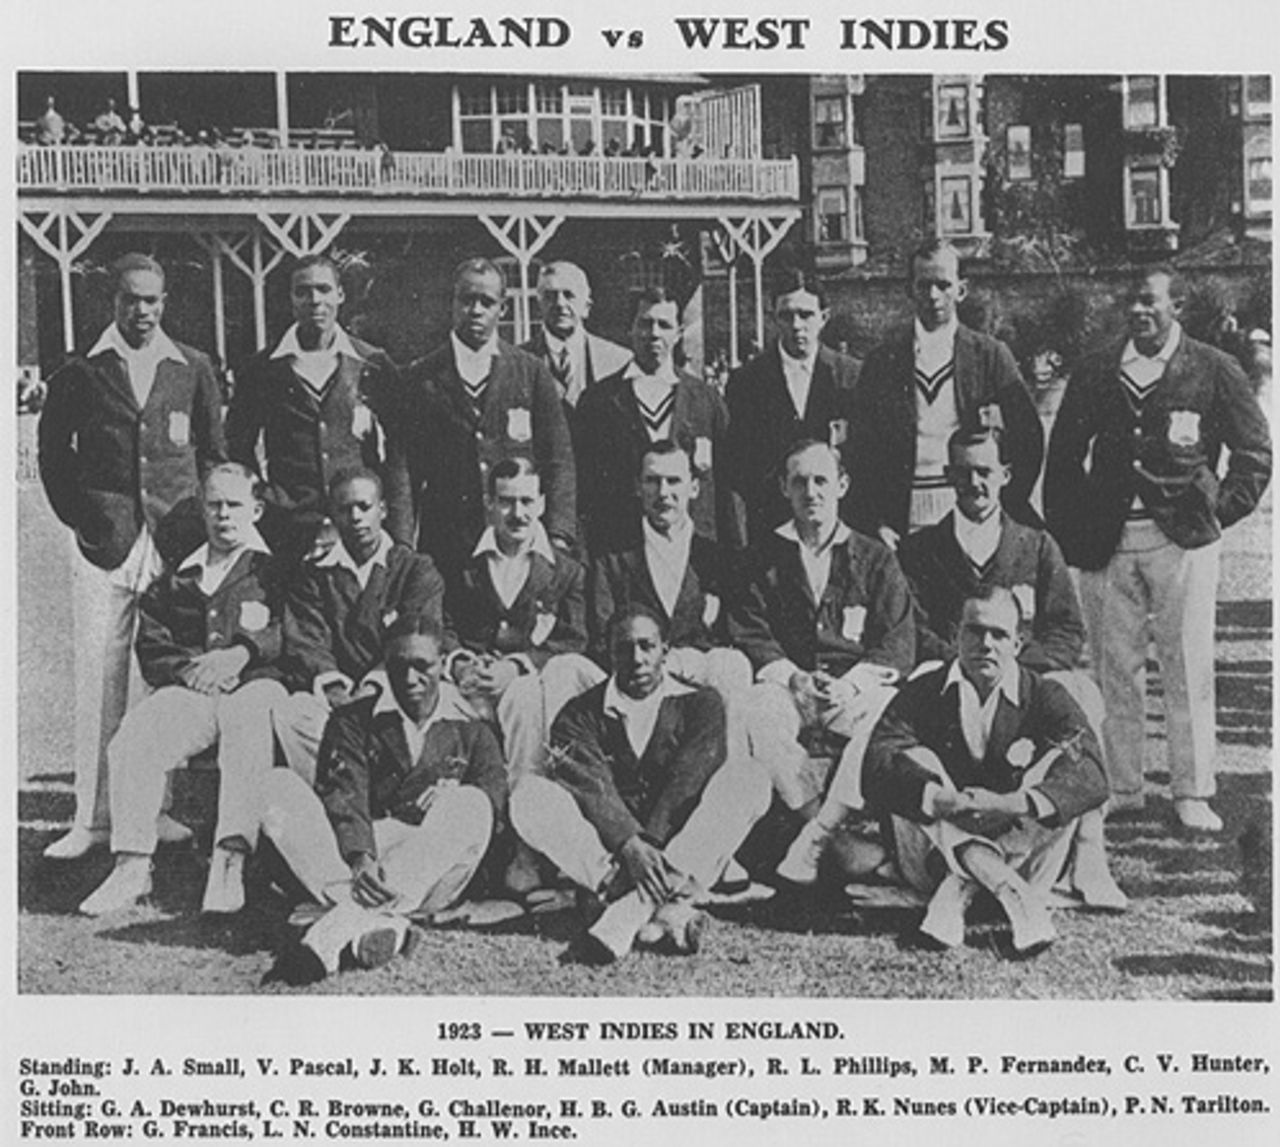 The West Indian squad that toured England in 1923, before Test status was conferred on the region